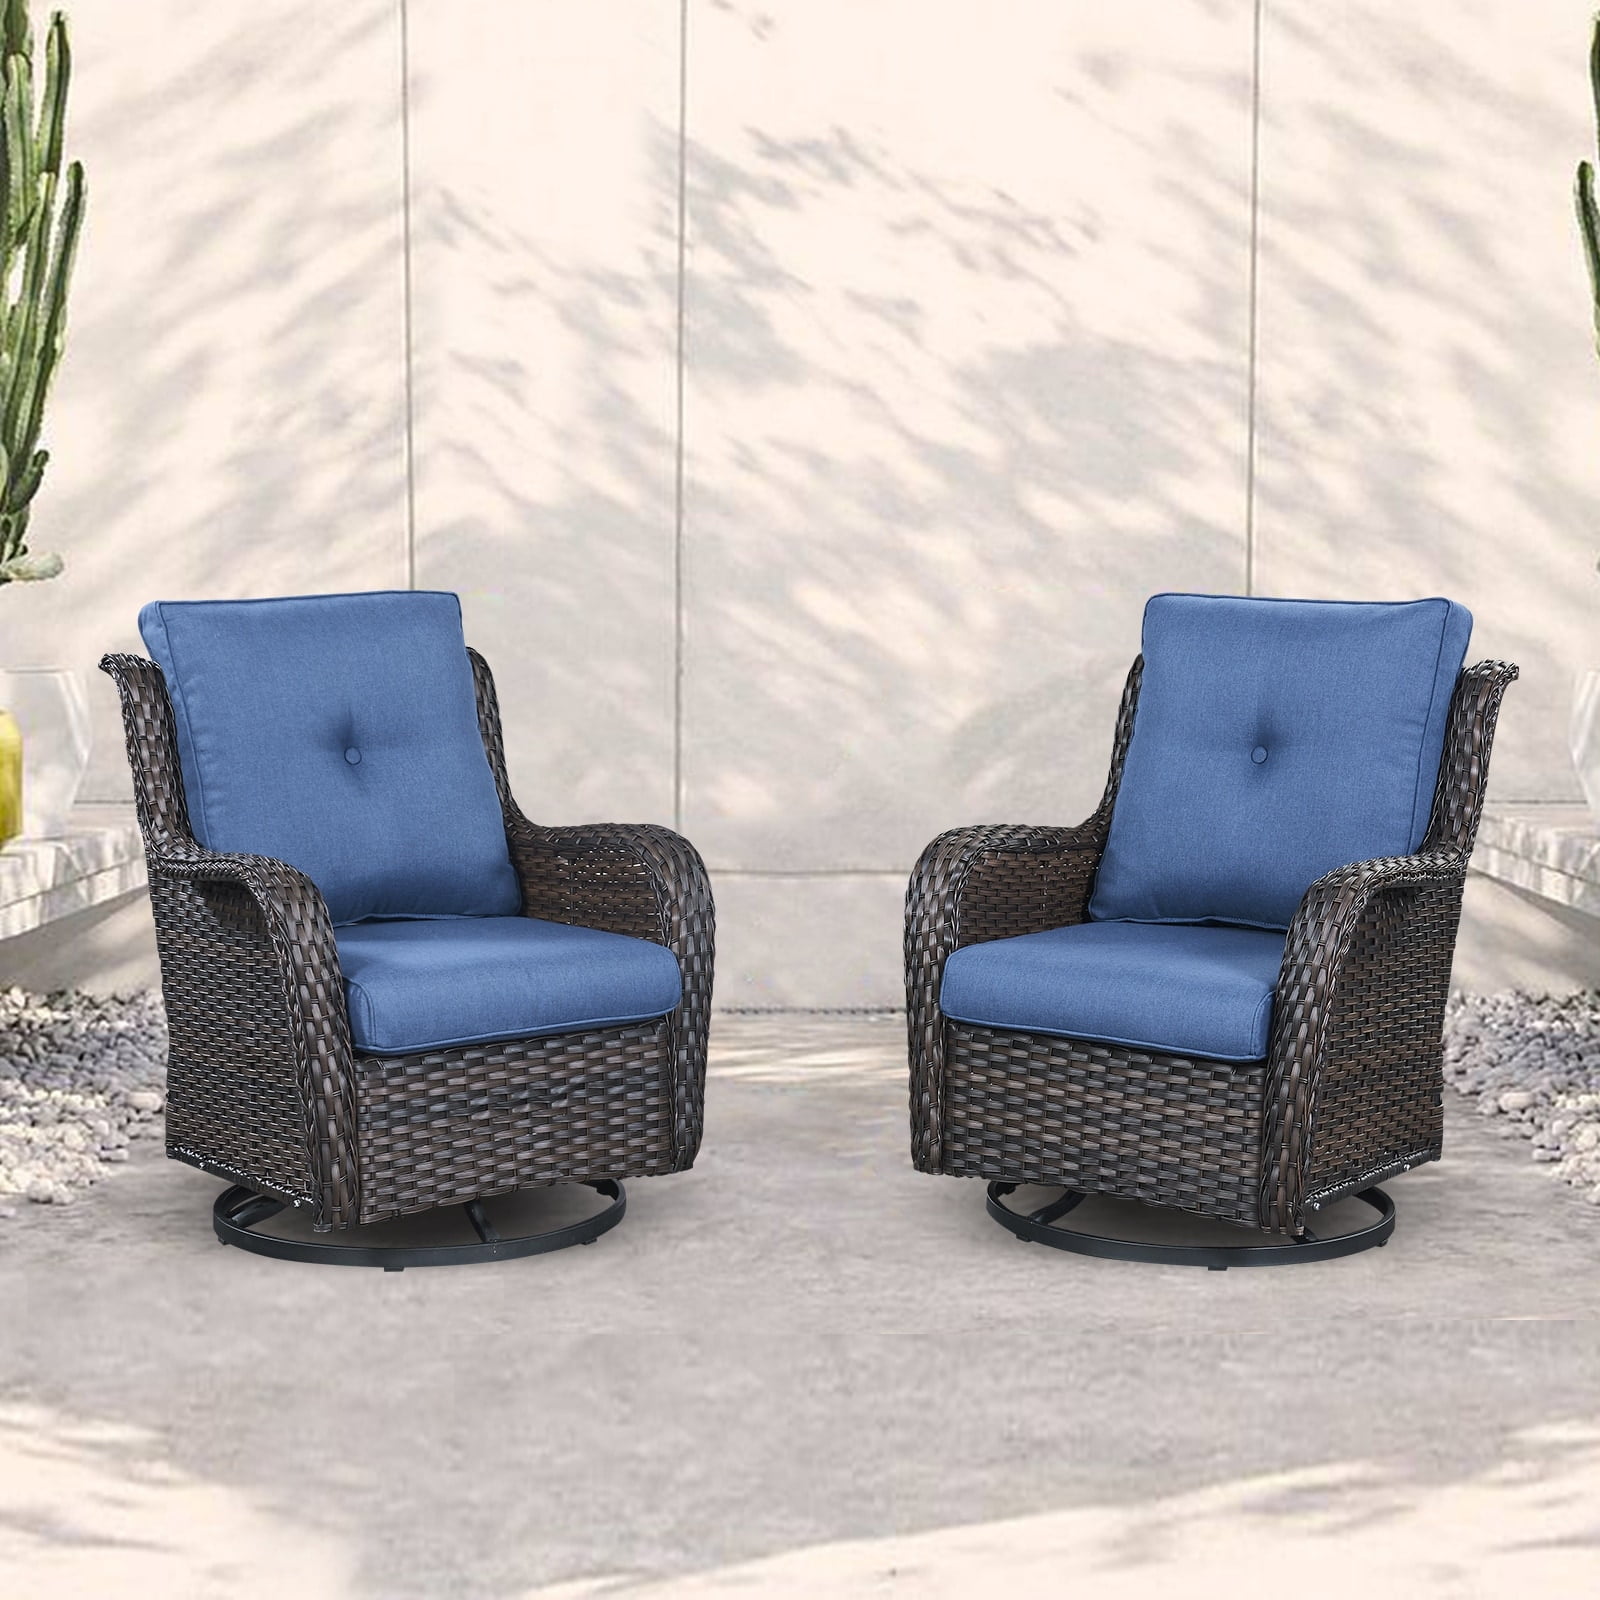 Pocassy Outdoor Wicker Glider Swivel Club Chairs (Set of 2) Brown/Blue ...